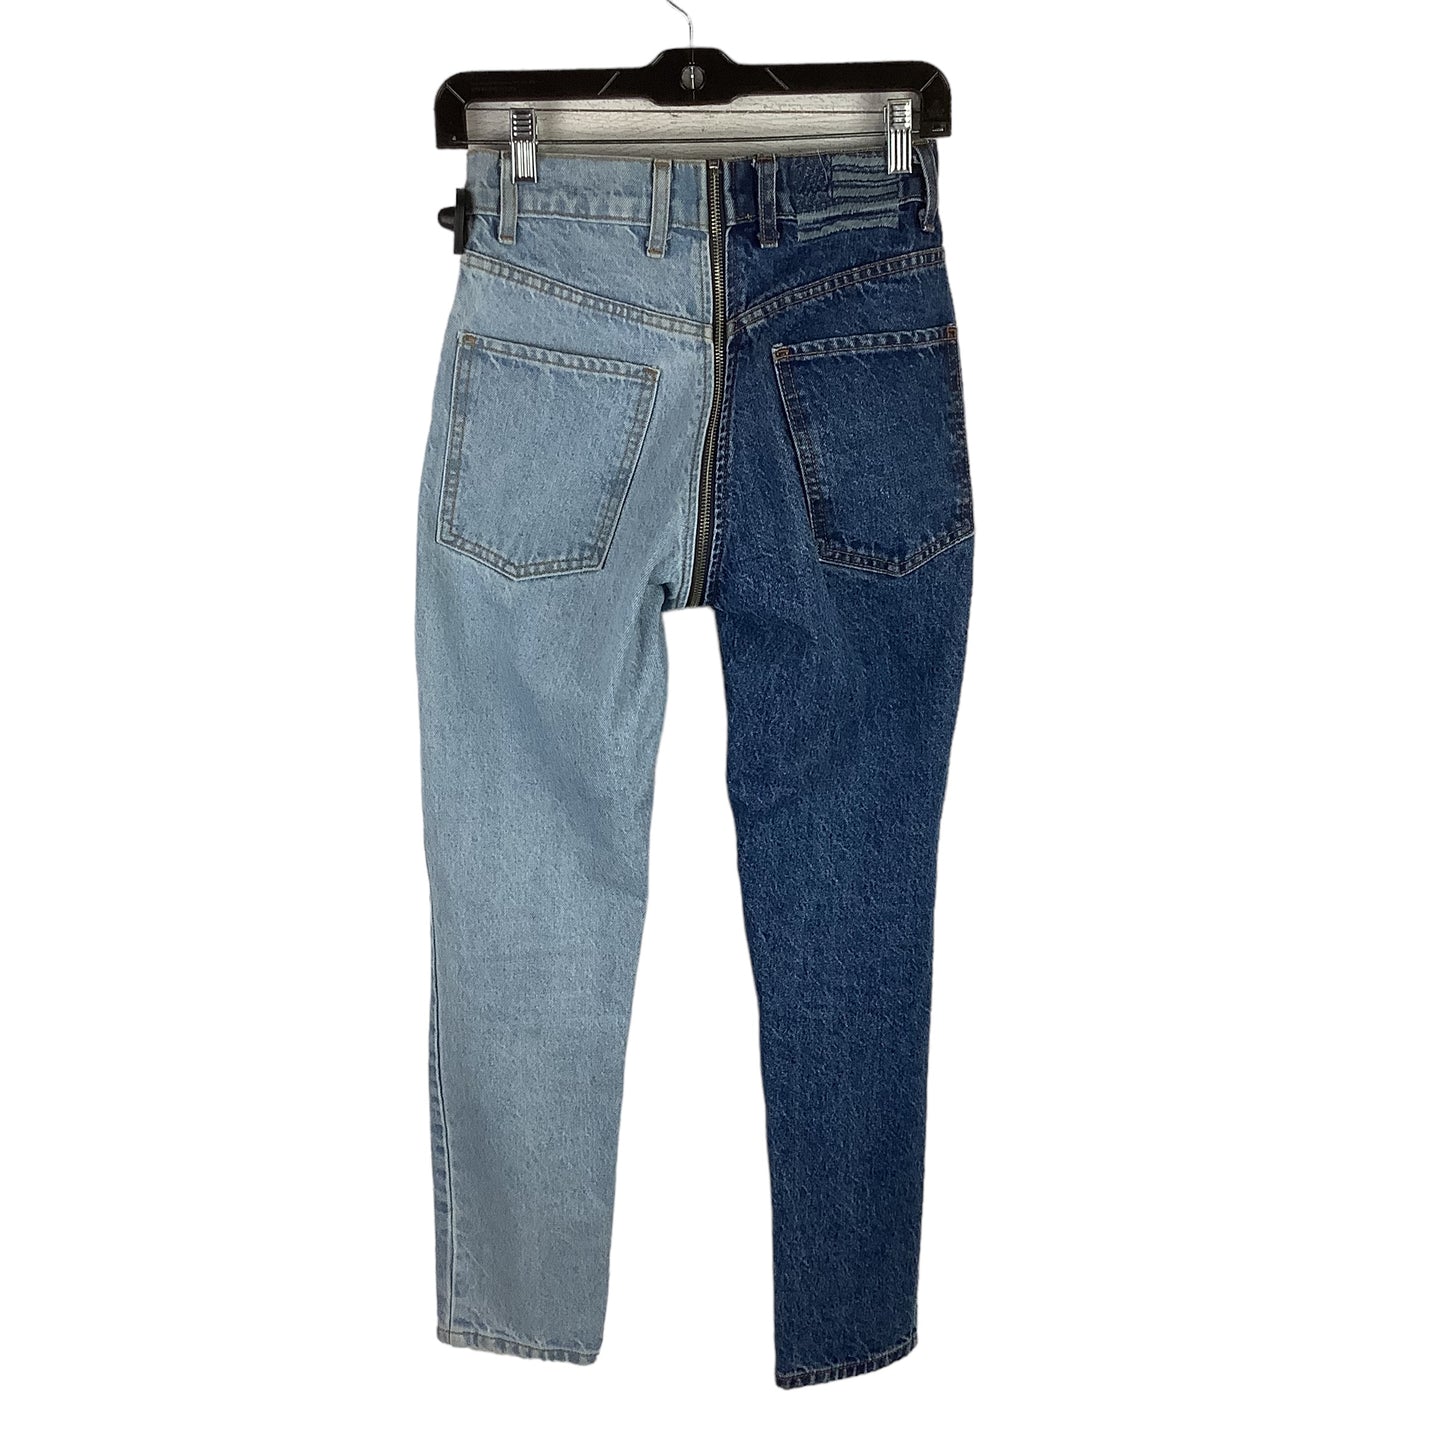 Jeans Skinny By Clothes Mentor  Size: 24 (0)